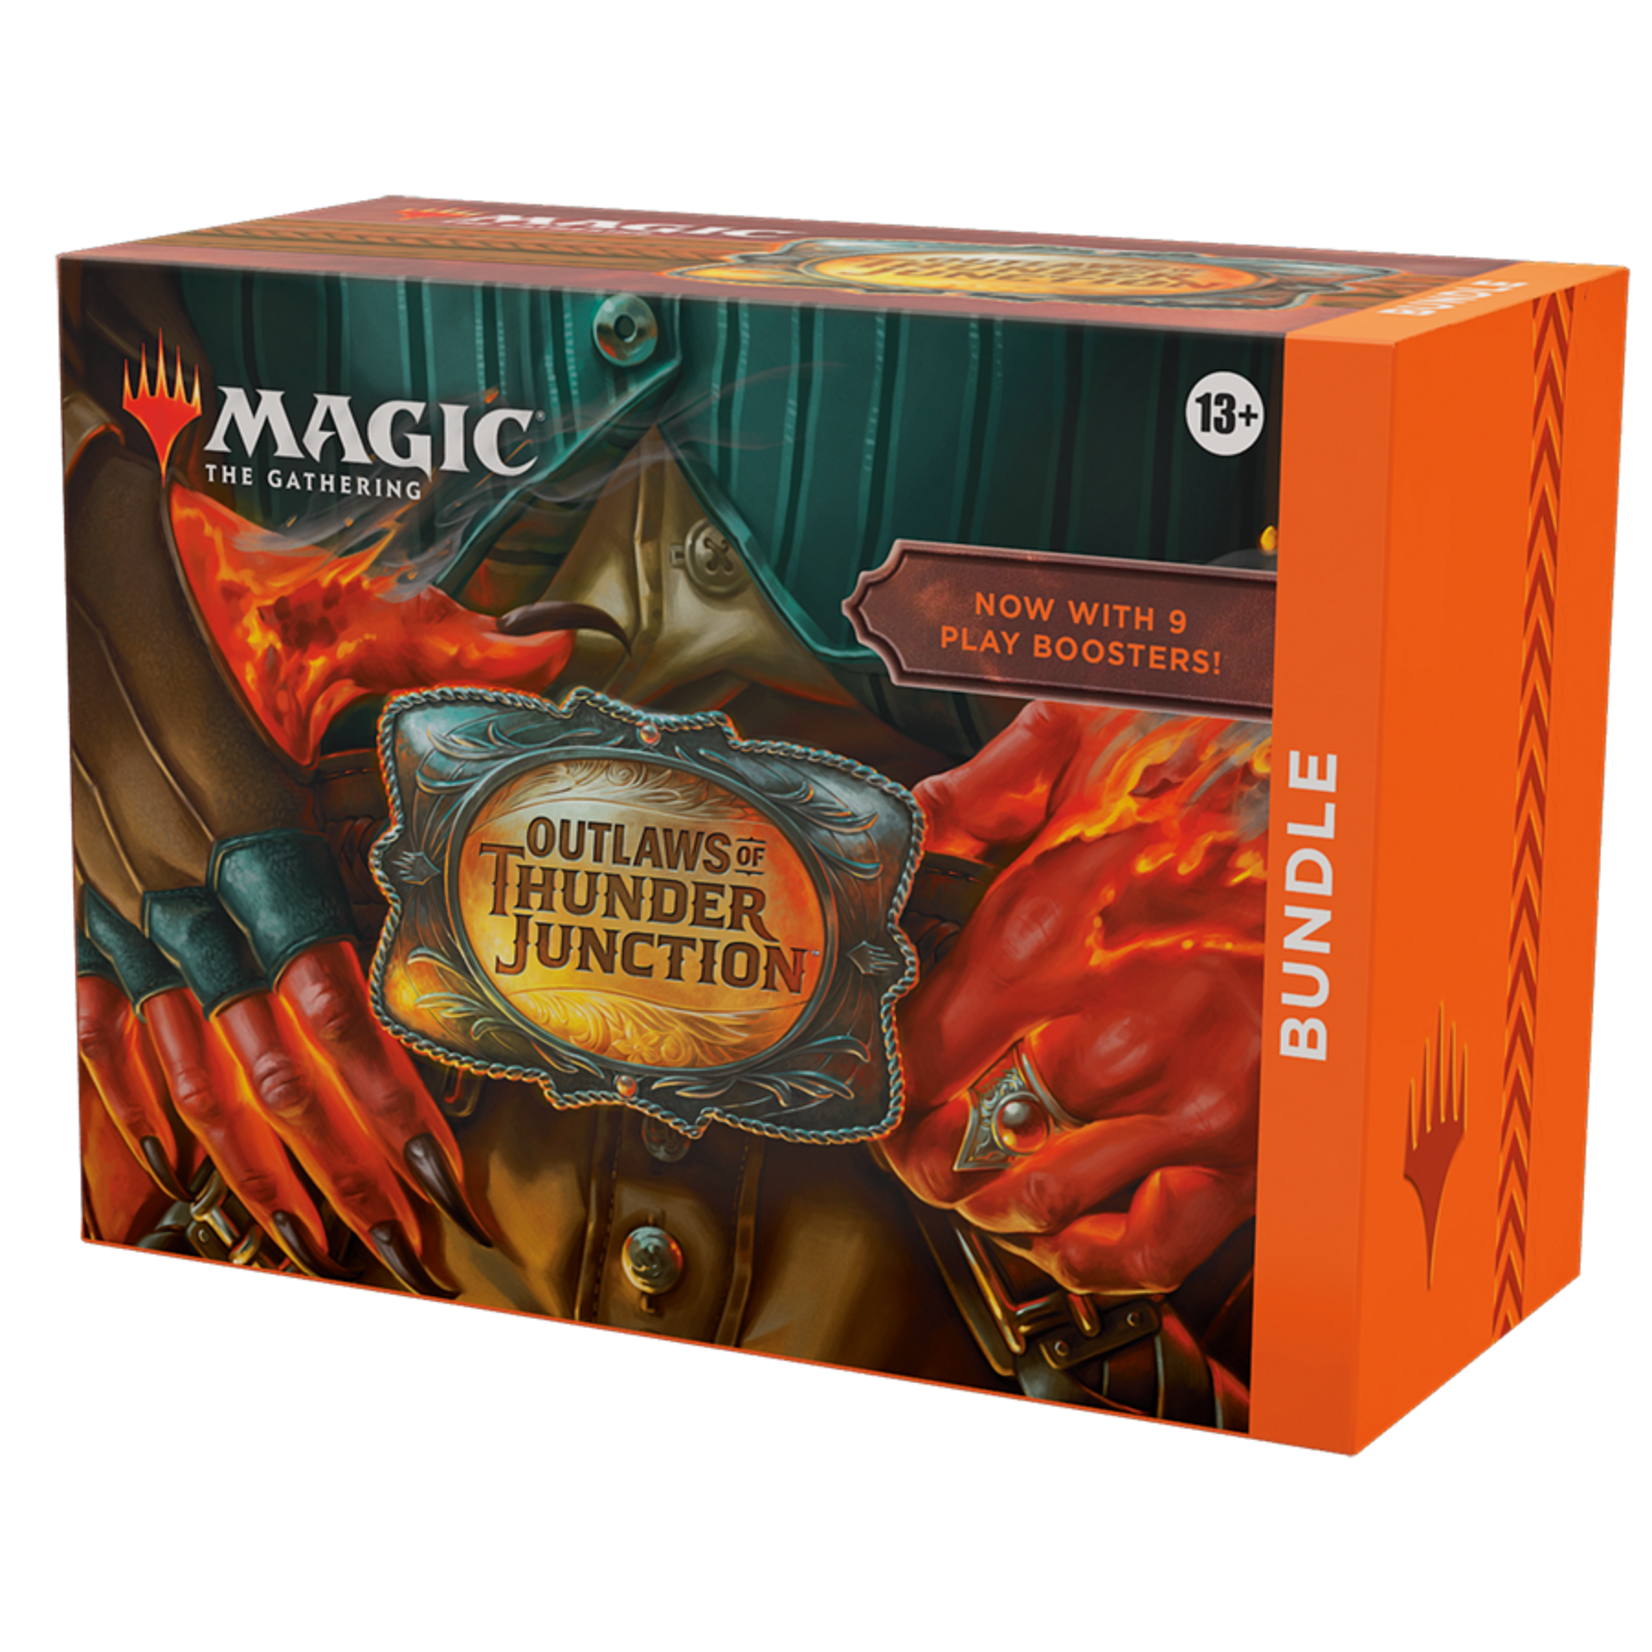 Wizards of the Coast Magic - Outlaws of Thunder Junction Bundle